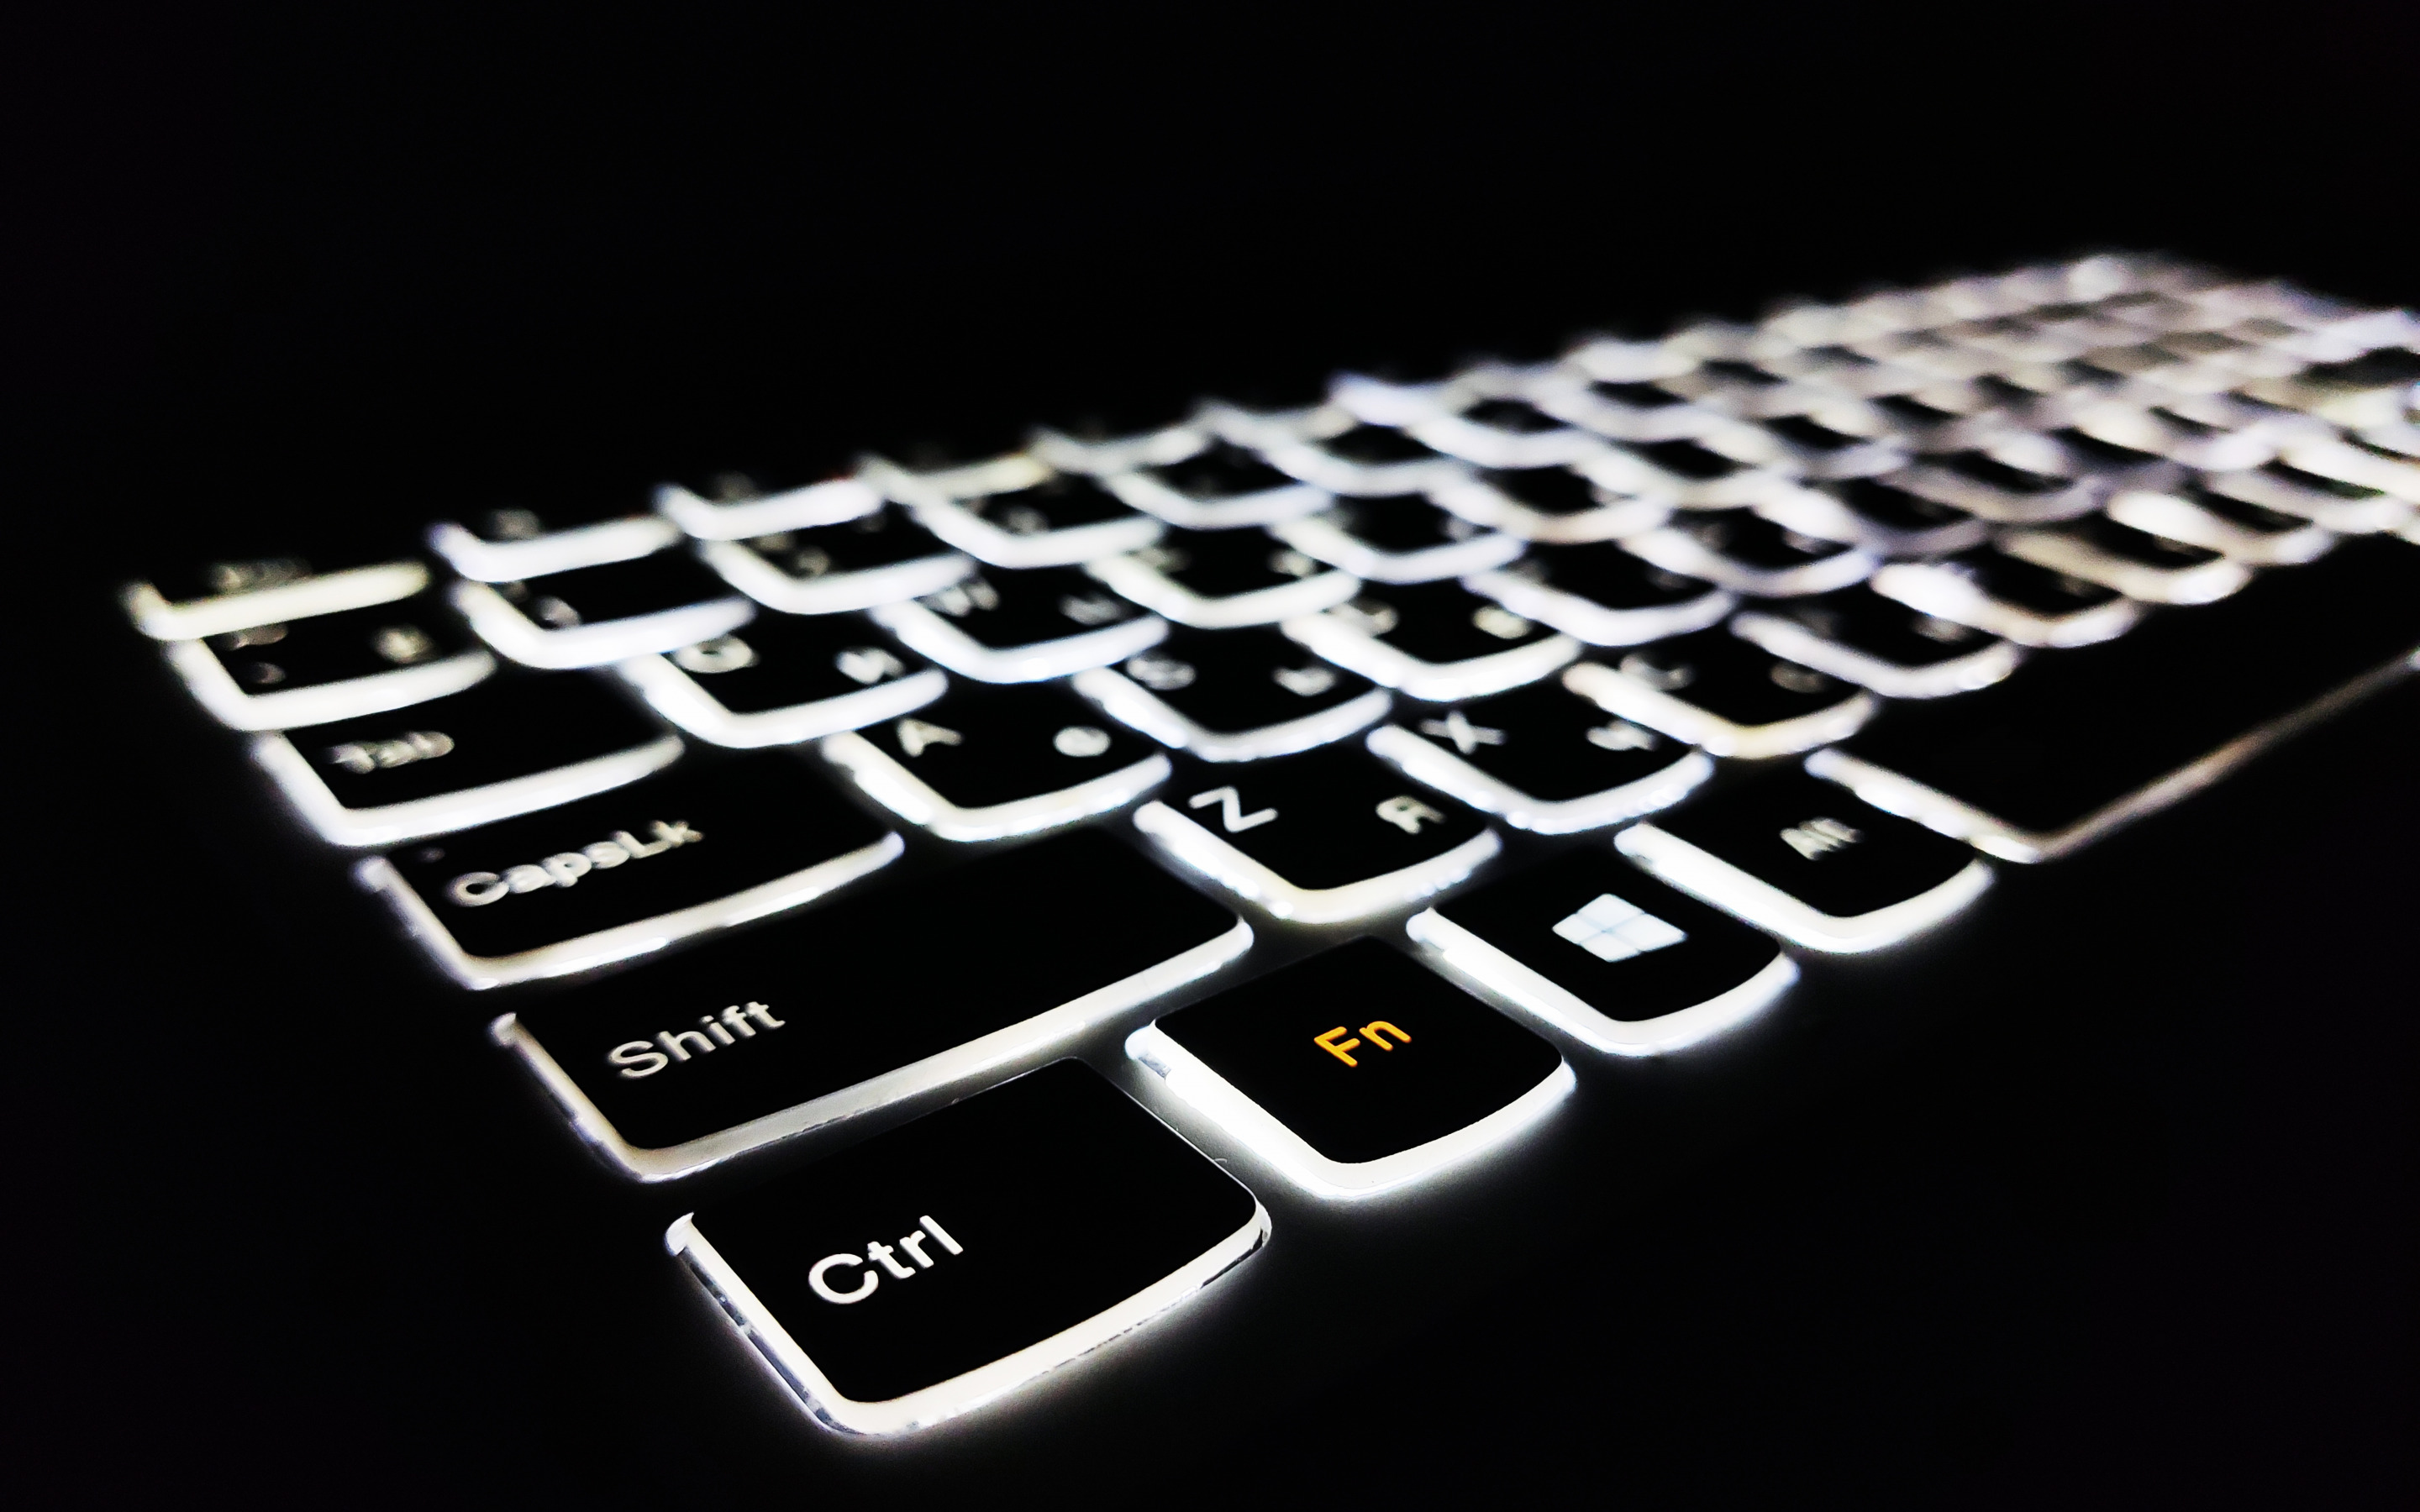 Download wallpapers keyboard with white backlight, keyboard on black  background, modern technology, keyboard, key illumination, it service  concepts for desktop with resolution 2880x1800. High Quality HD pictures  wallpapers